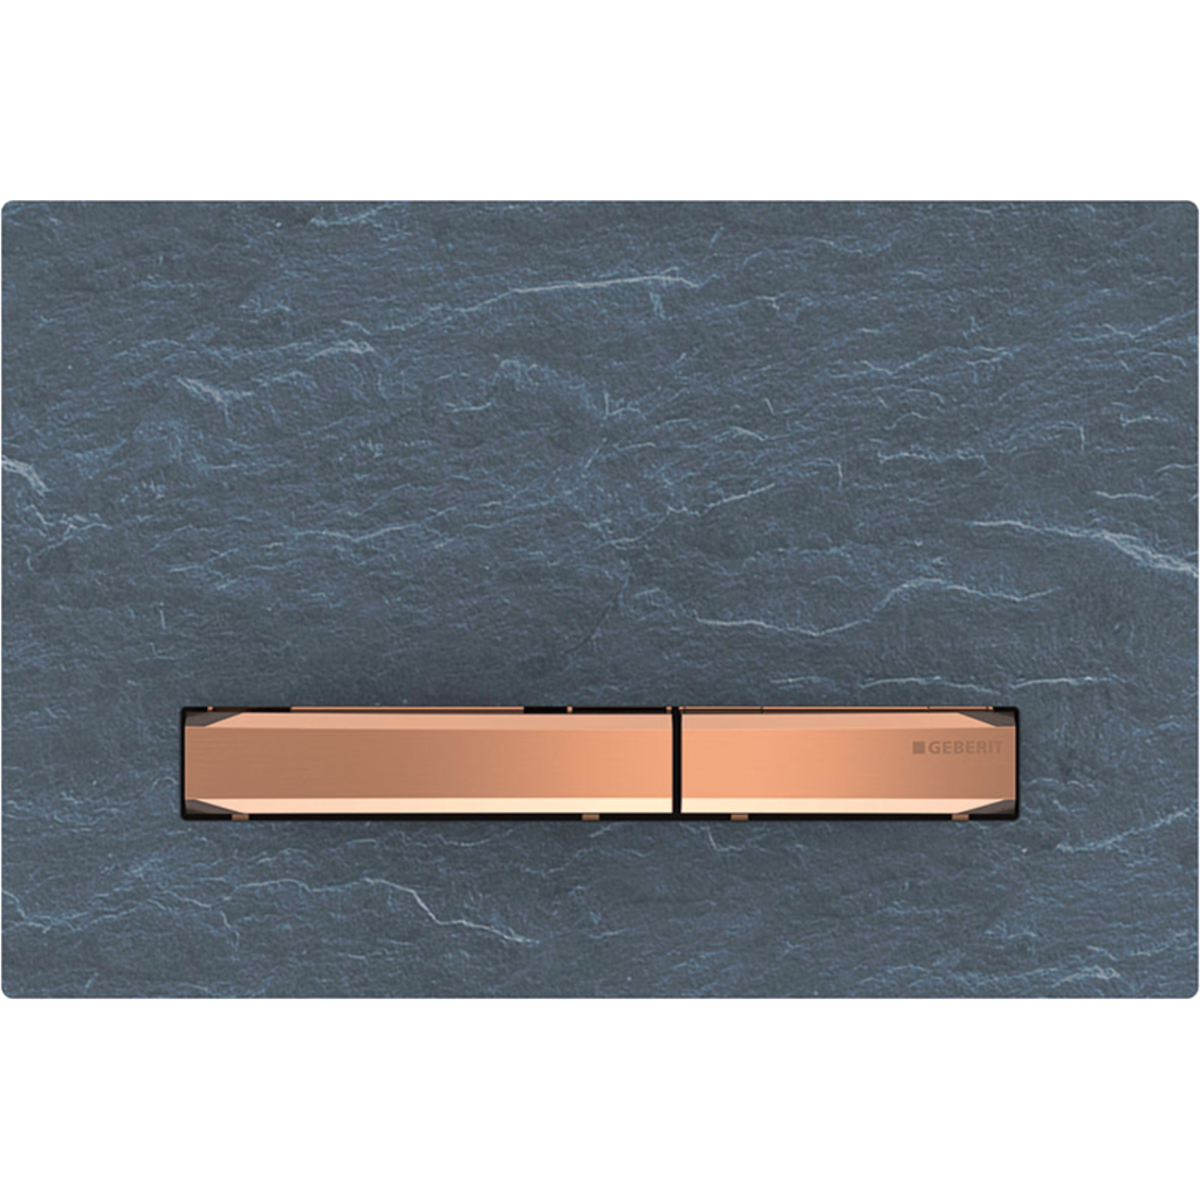 Geberit 115.670.JM.2 Actuator Plate Sigma50 for Dual Flush, Metal Colour Red Gold - Base Plate and Buttons: Red Gold/Cover Plate: Mustang Slate